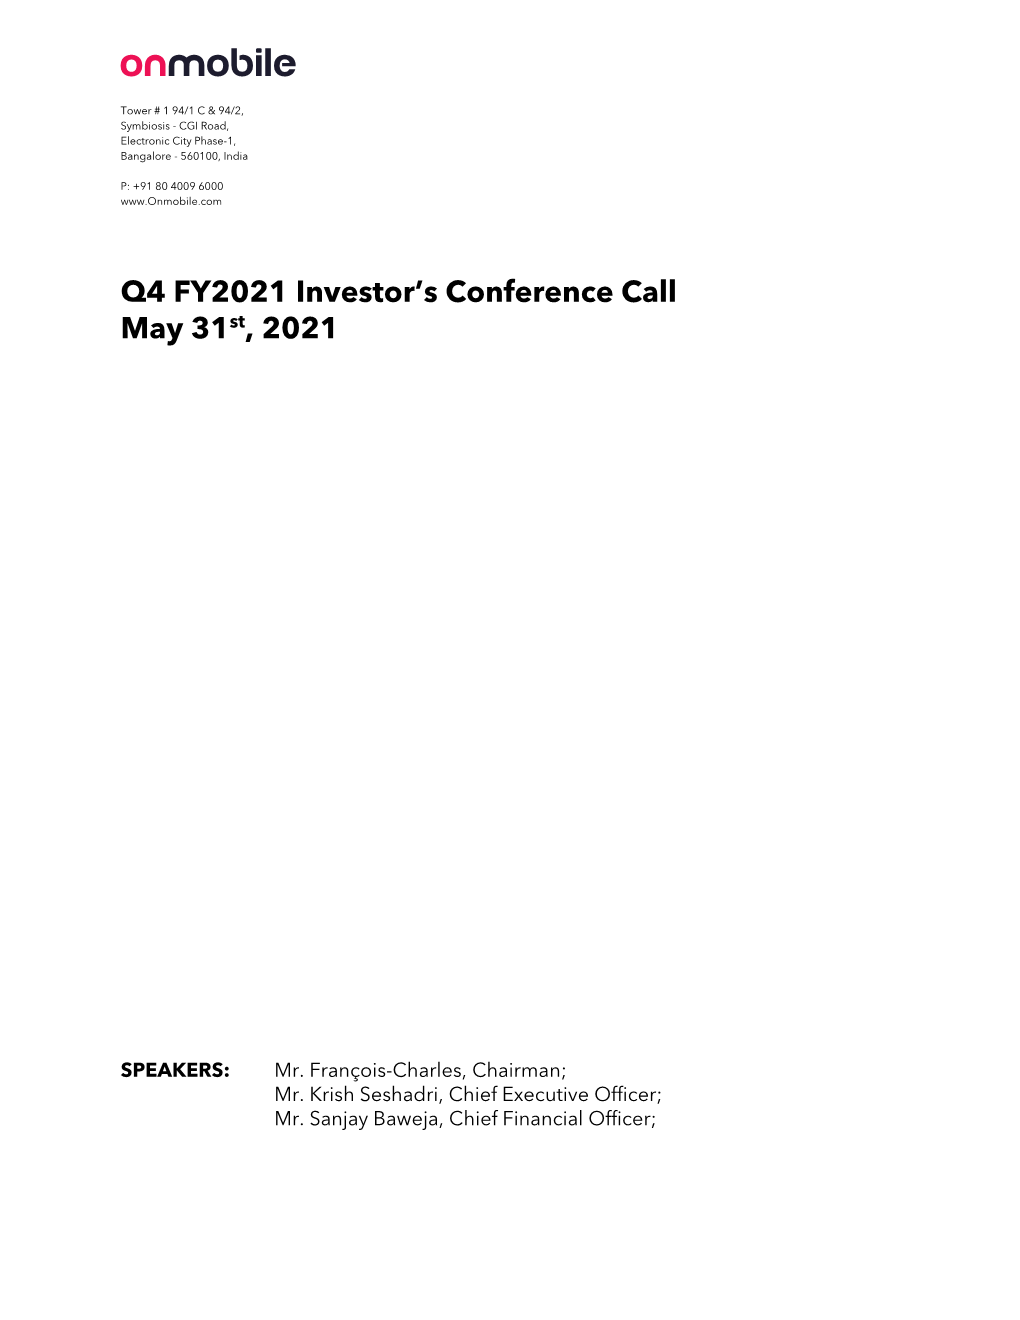 Q4 FY2021 Investor's Conference Call May 31St, 2021